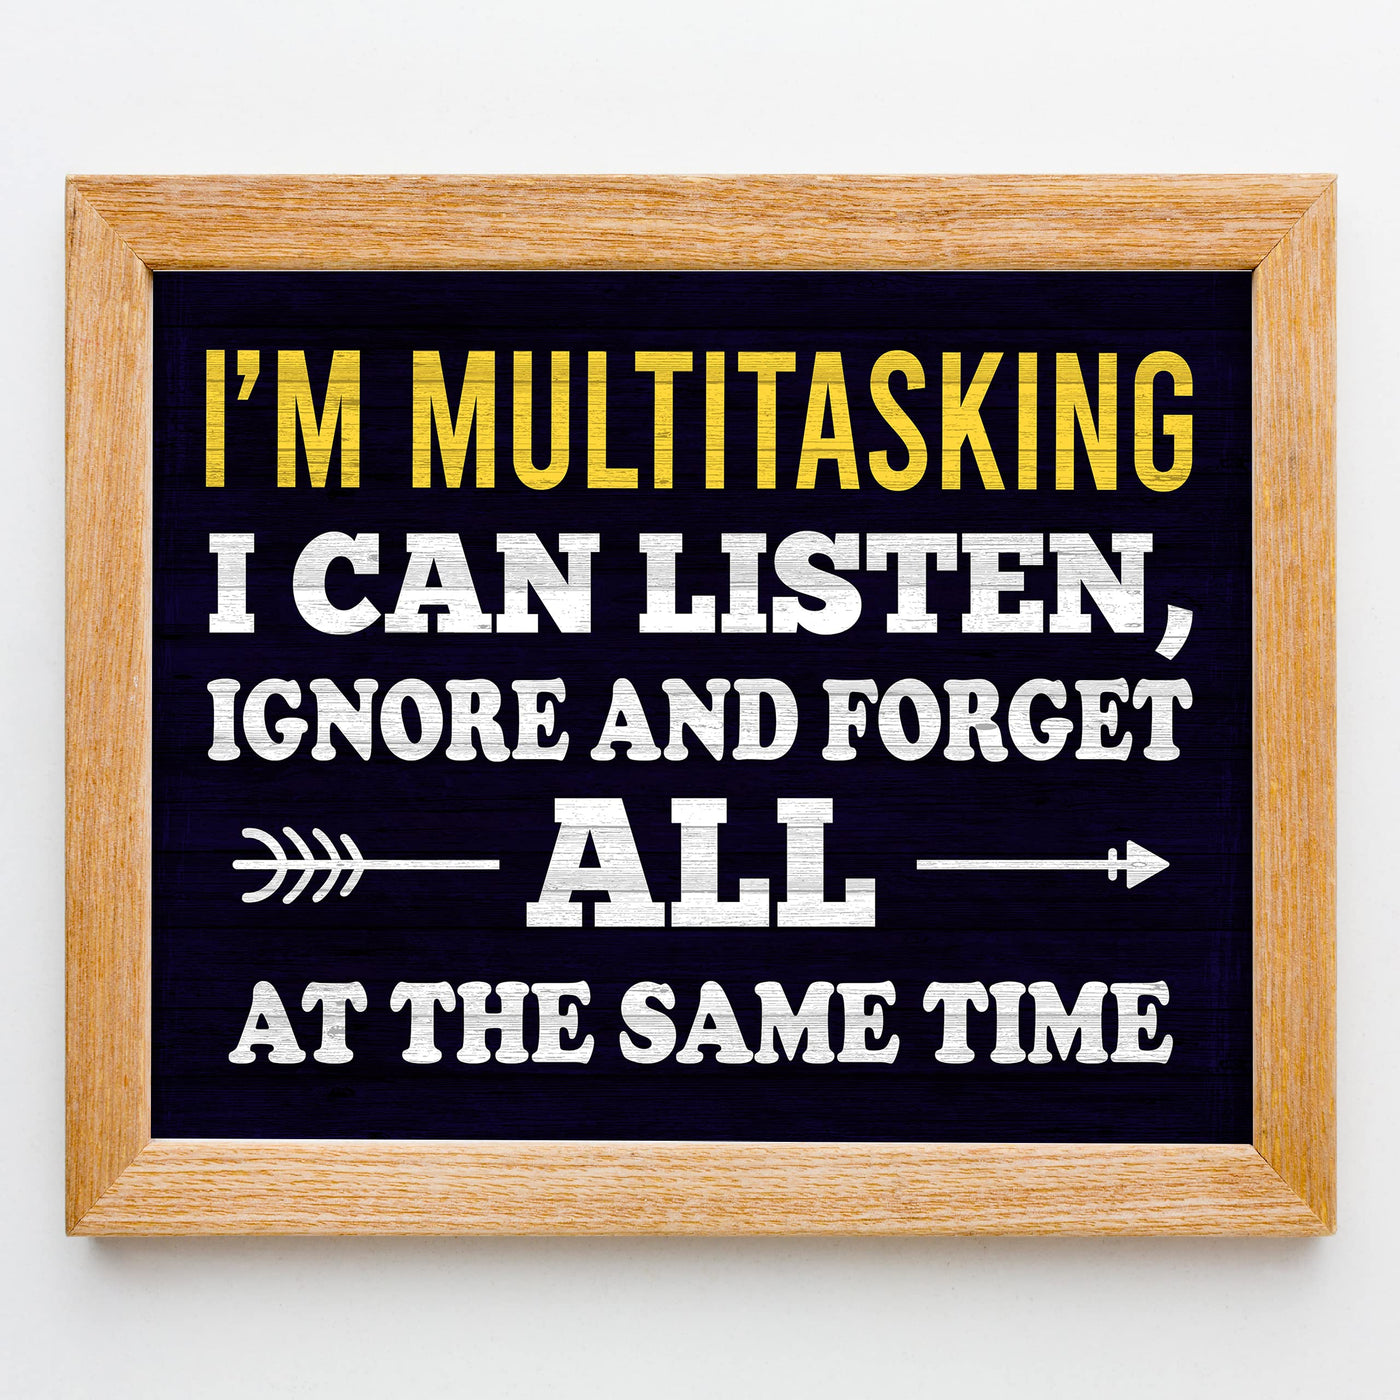 Multitasking-Can Listen, Ignore & Forget At Same Time Funny Office Wall Sign -10x8" Sarcastic Art Print-Ready to Frame. Humorous Home-Bar-Shop-Cave Decor. Great Desk-Cubicle Sign. Fun Novelty Gift!